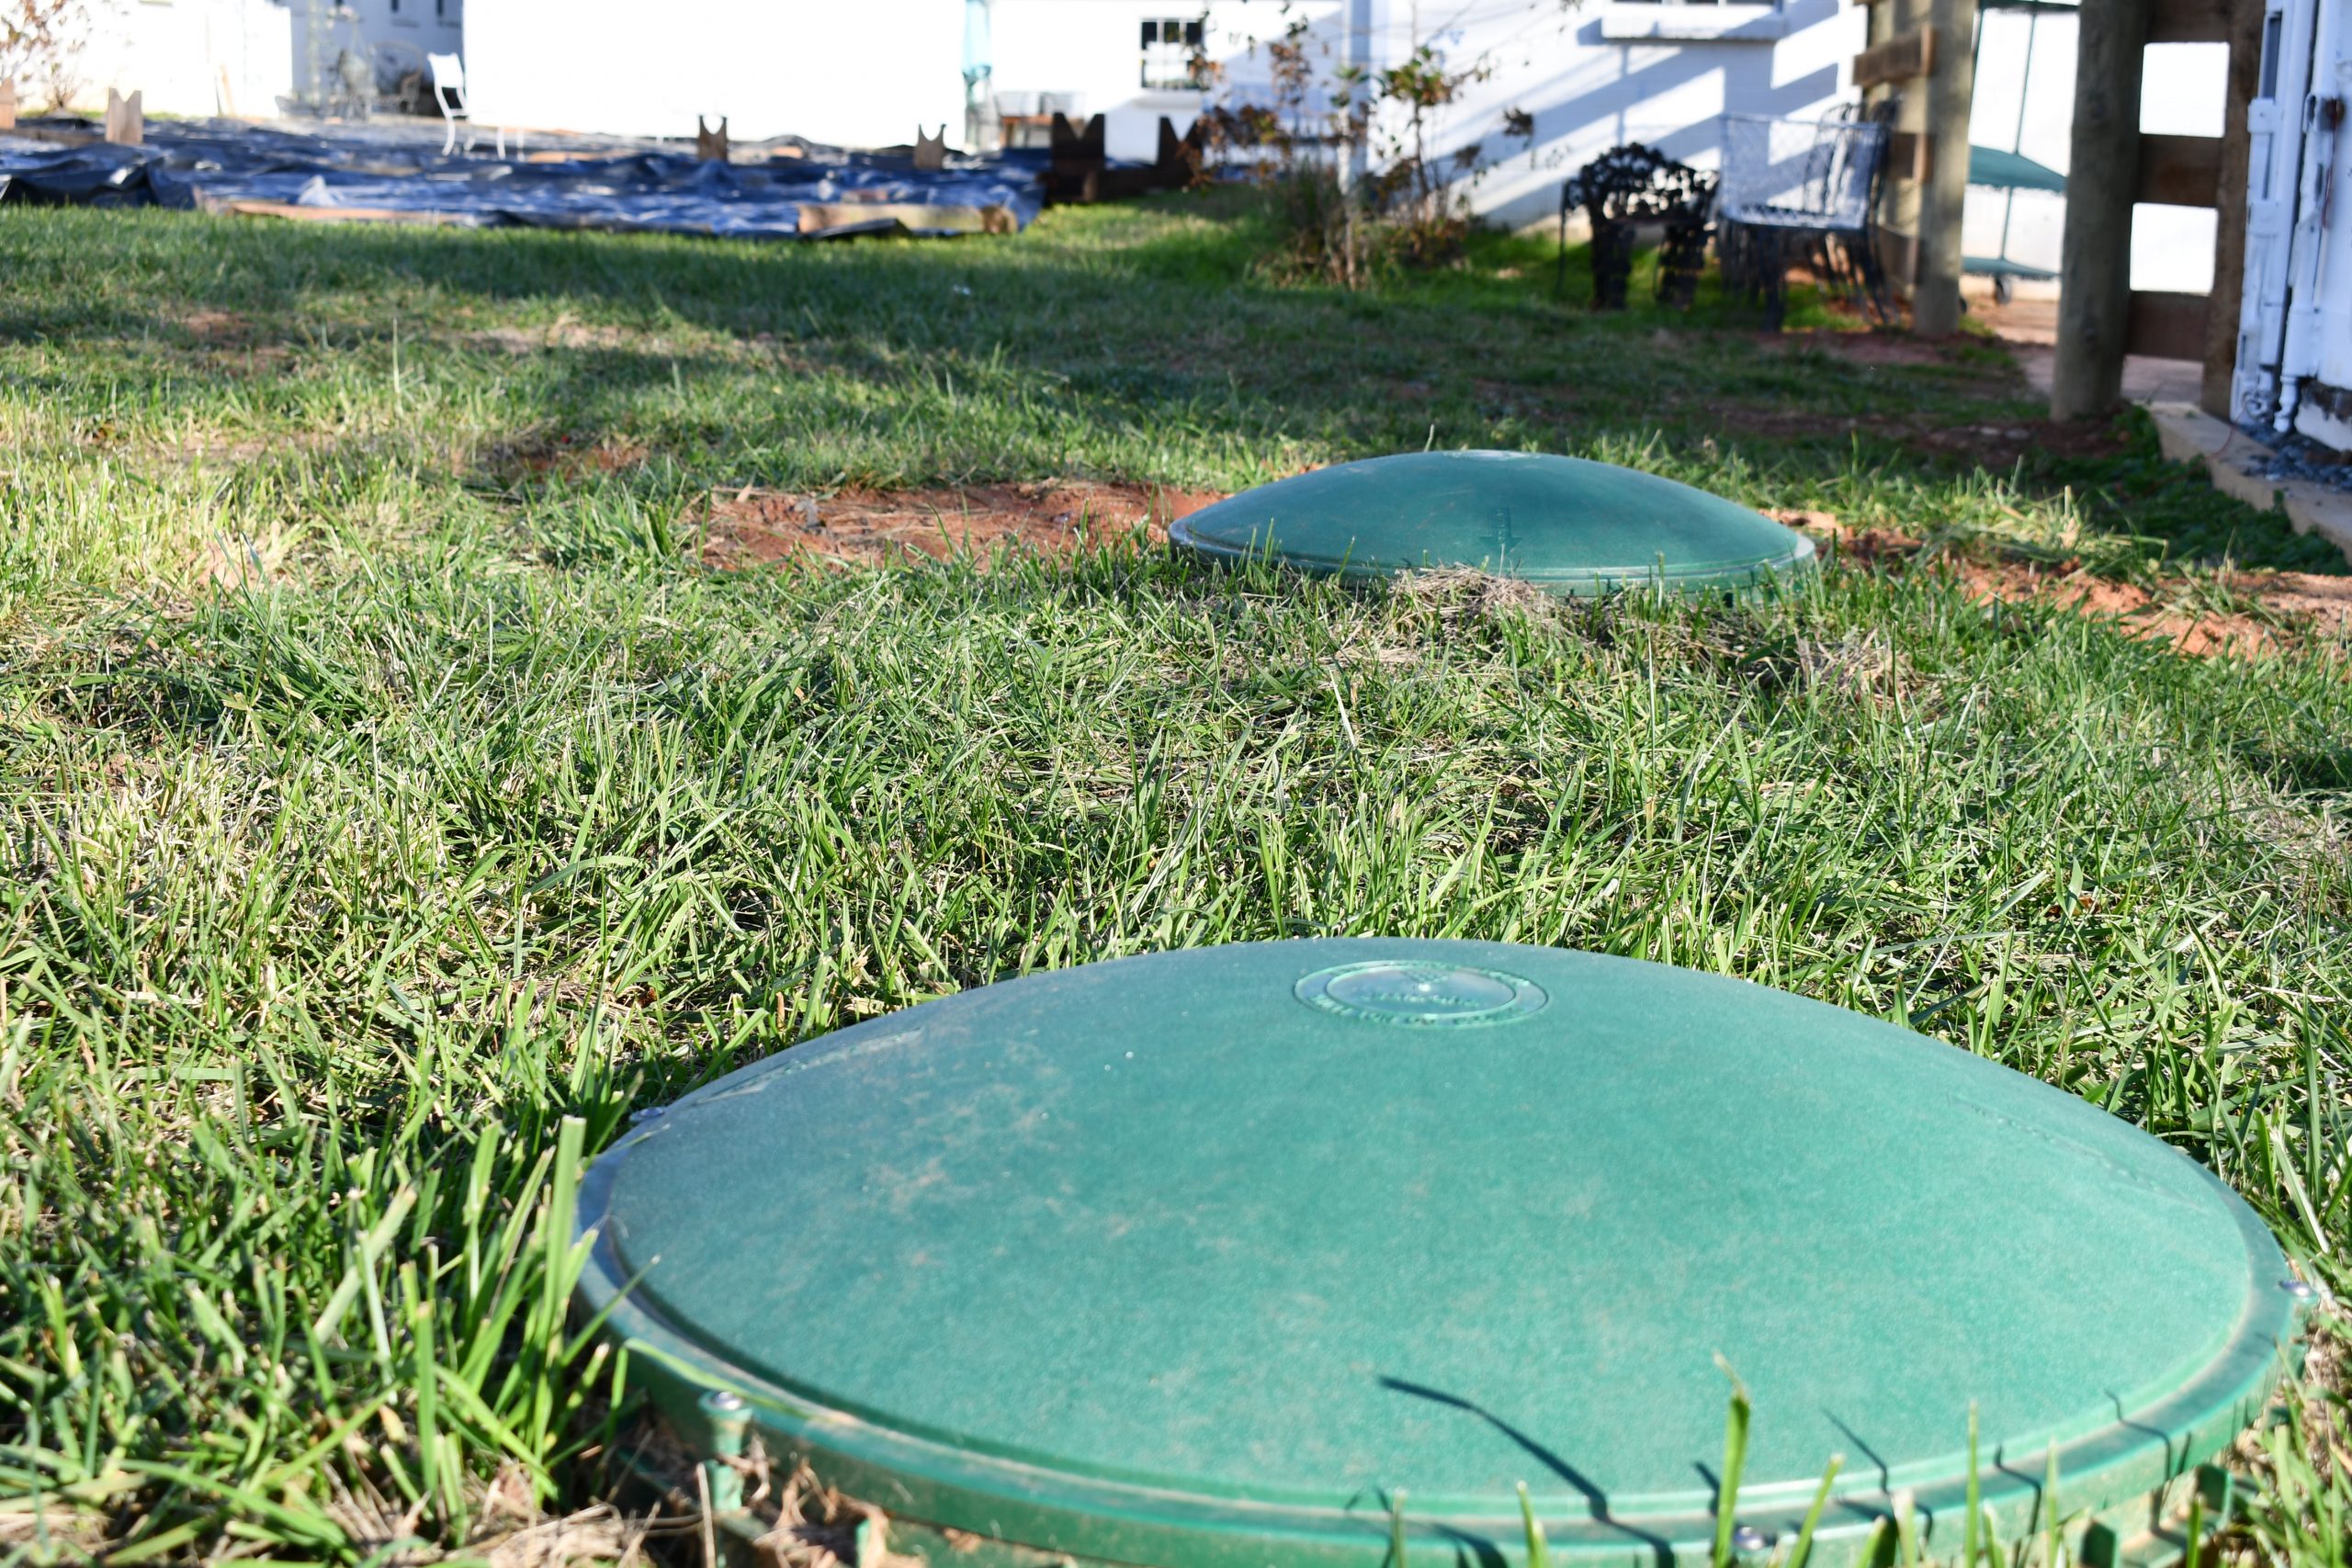 A photo of green barrels laid in-ground amid grass.